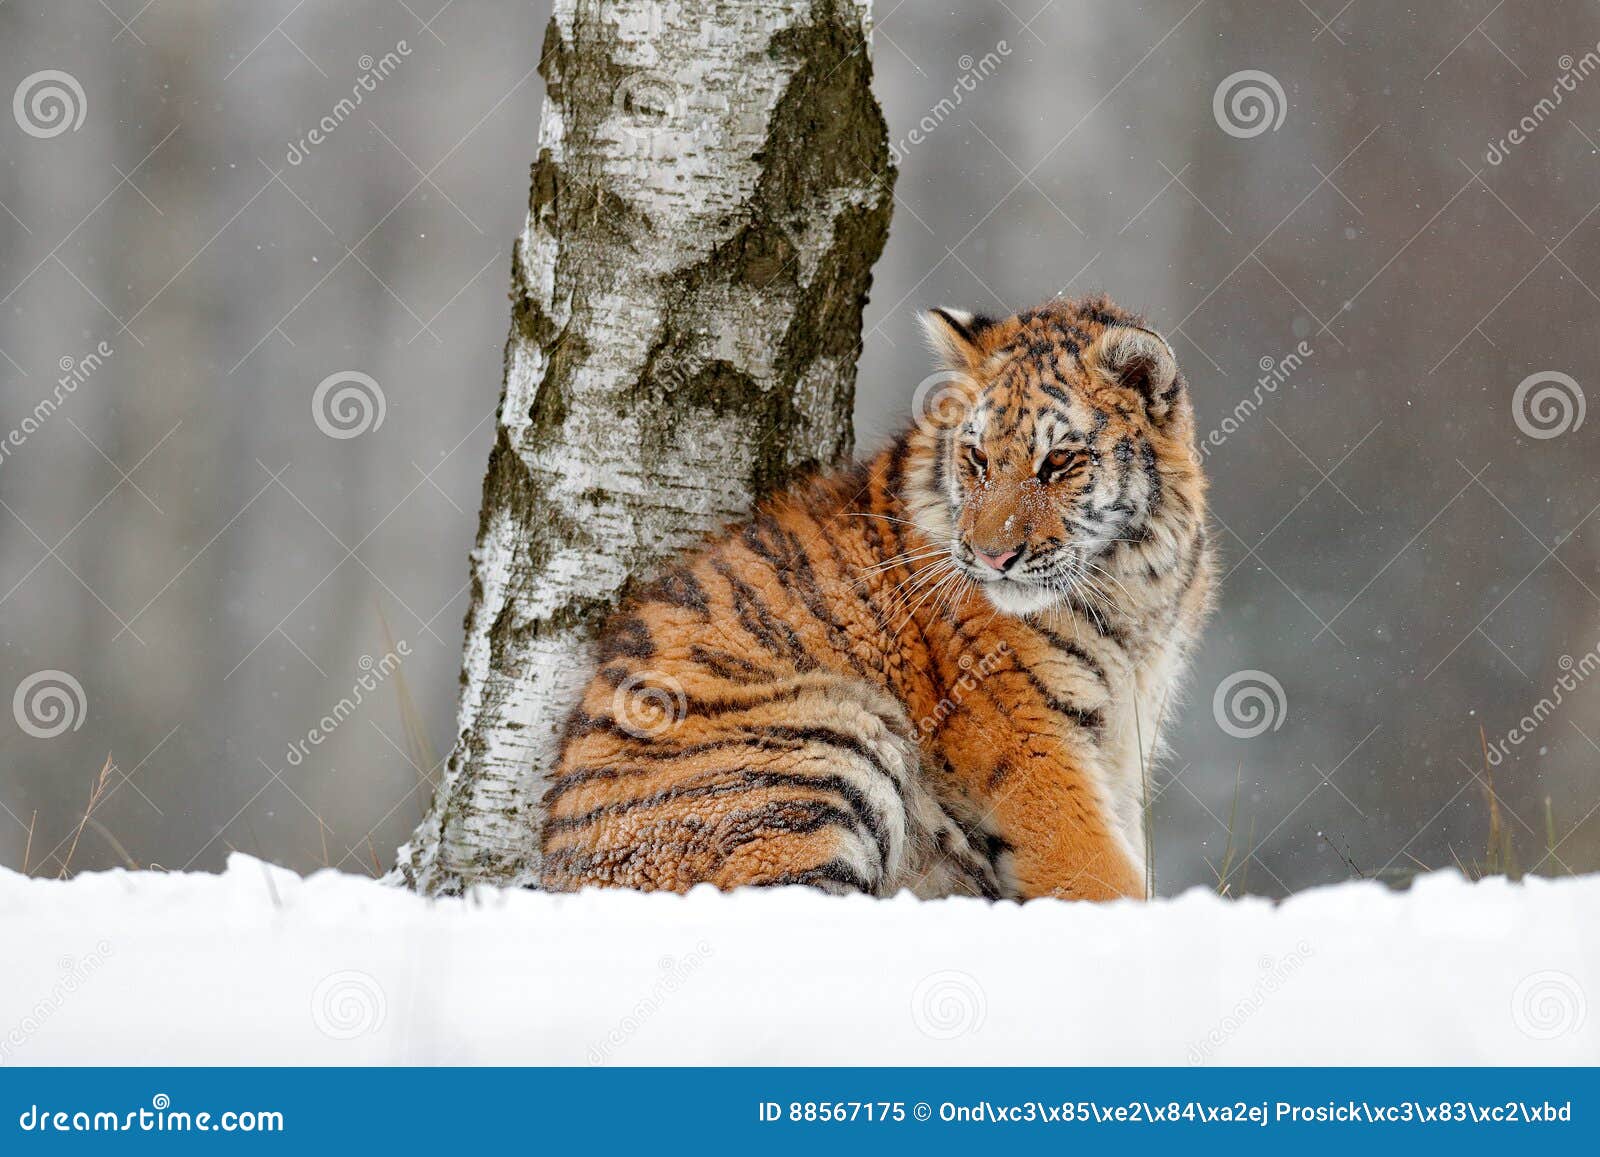 amur tiger sitting in snow. tiger in wild winter nature. action wildlife scene with danger animal. cold winter in tajga. snowflake